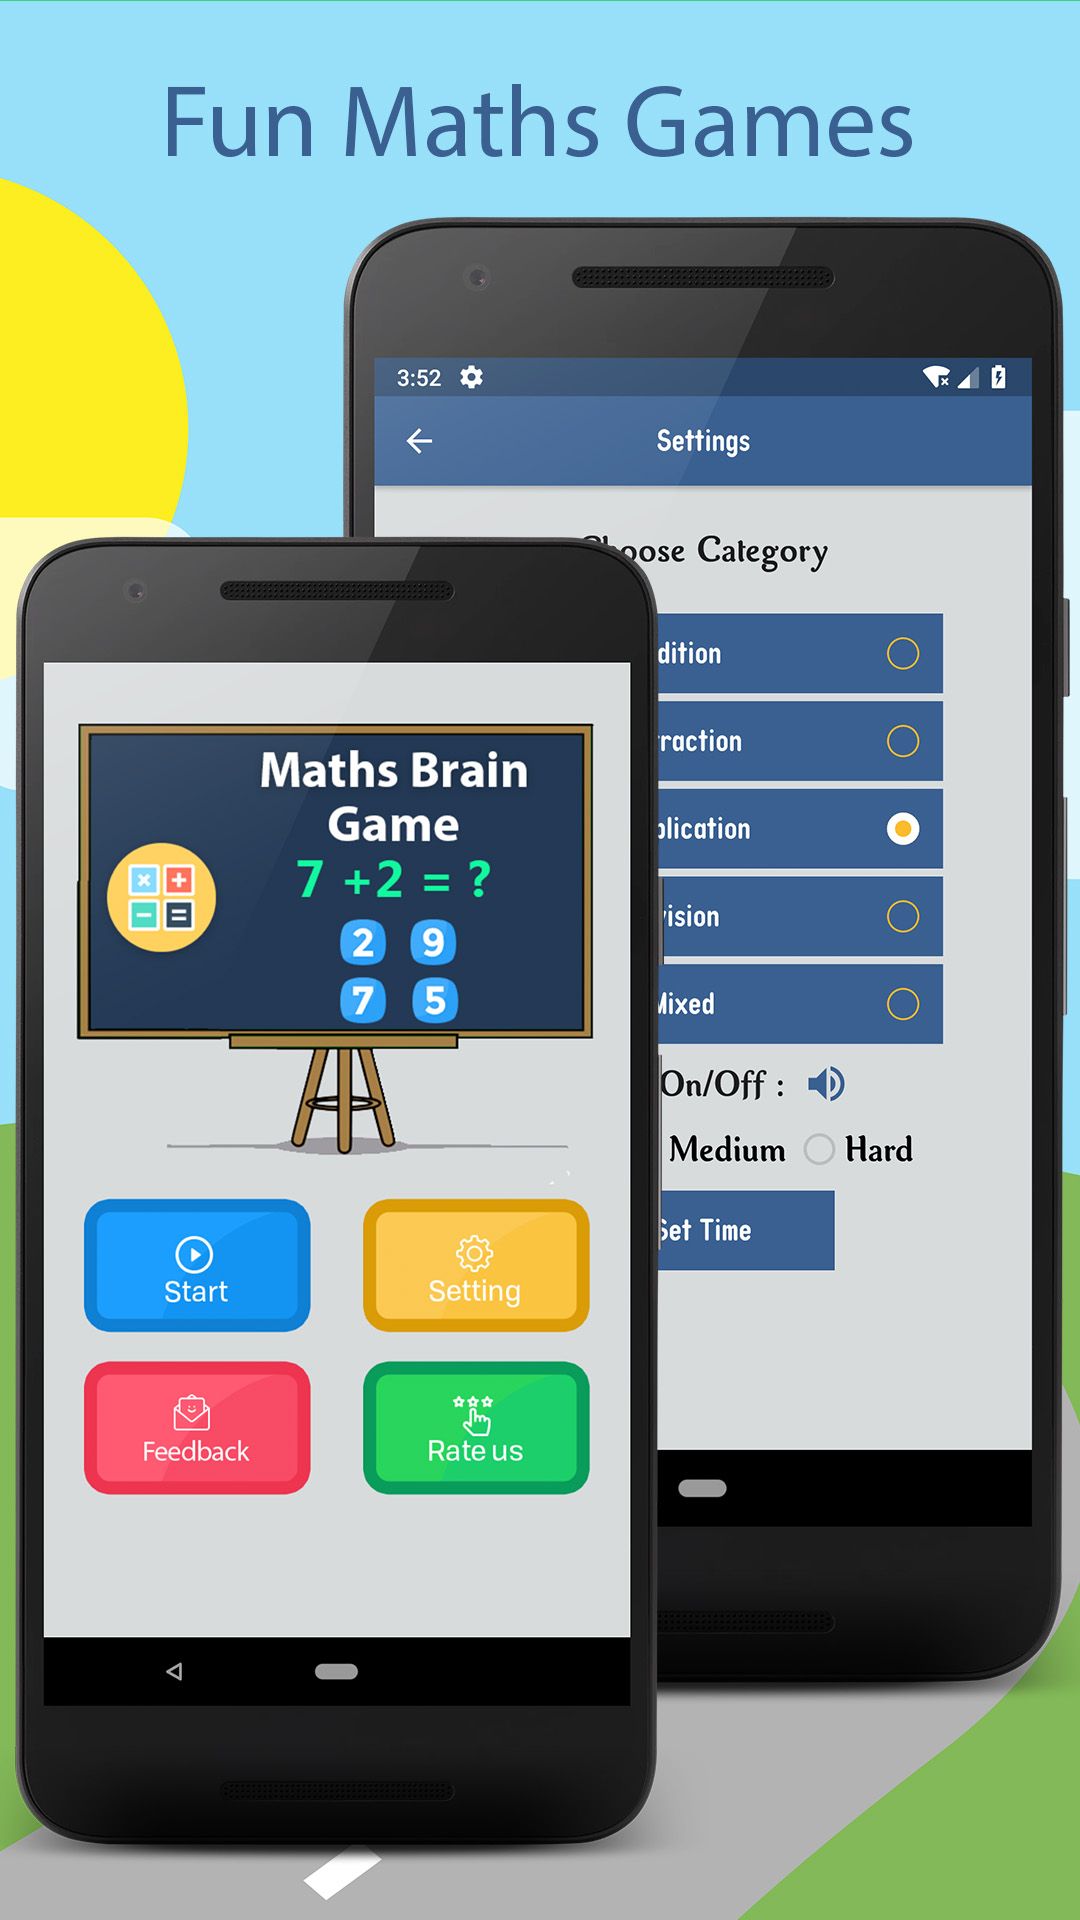 Download Maths Games For Android Gamerraport S Blog